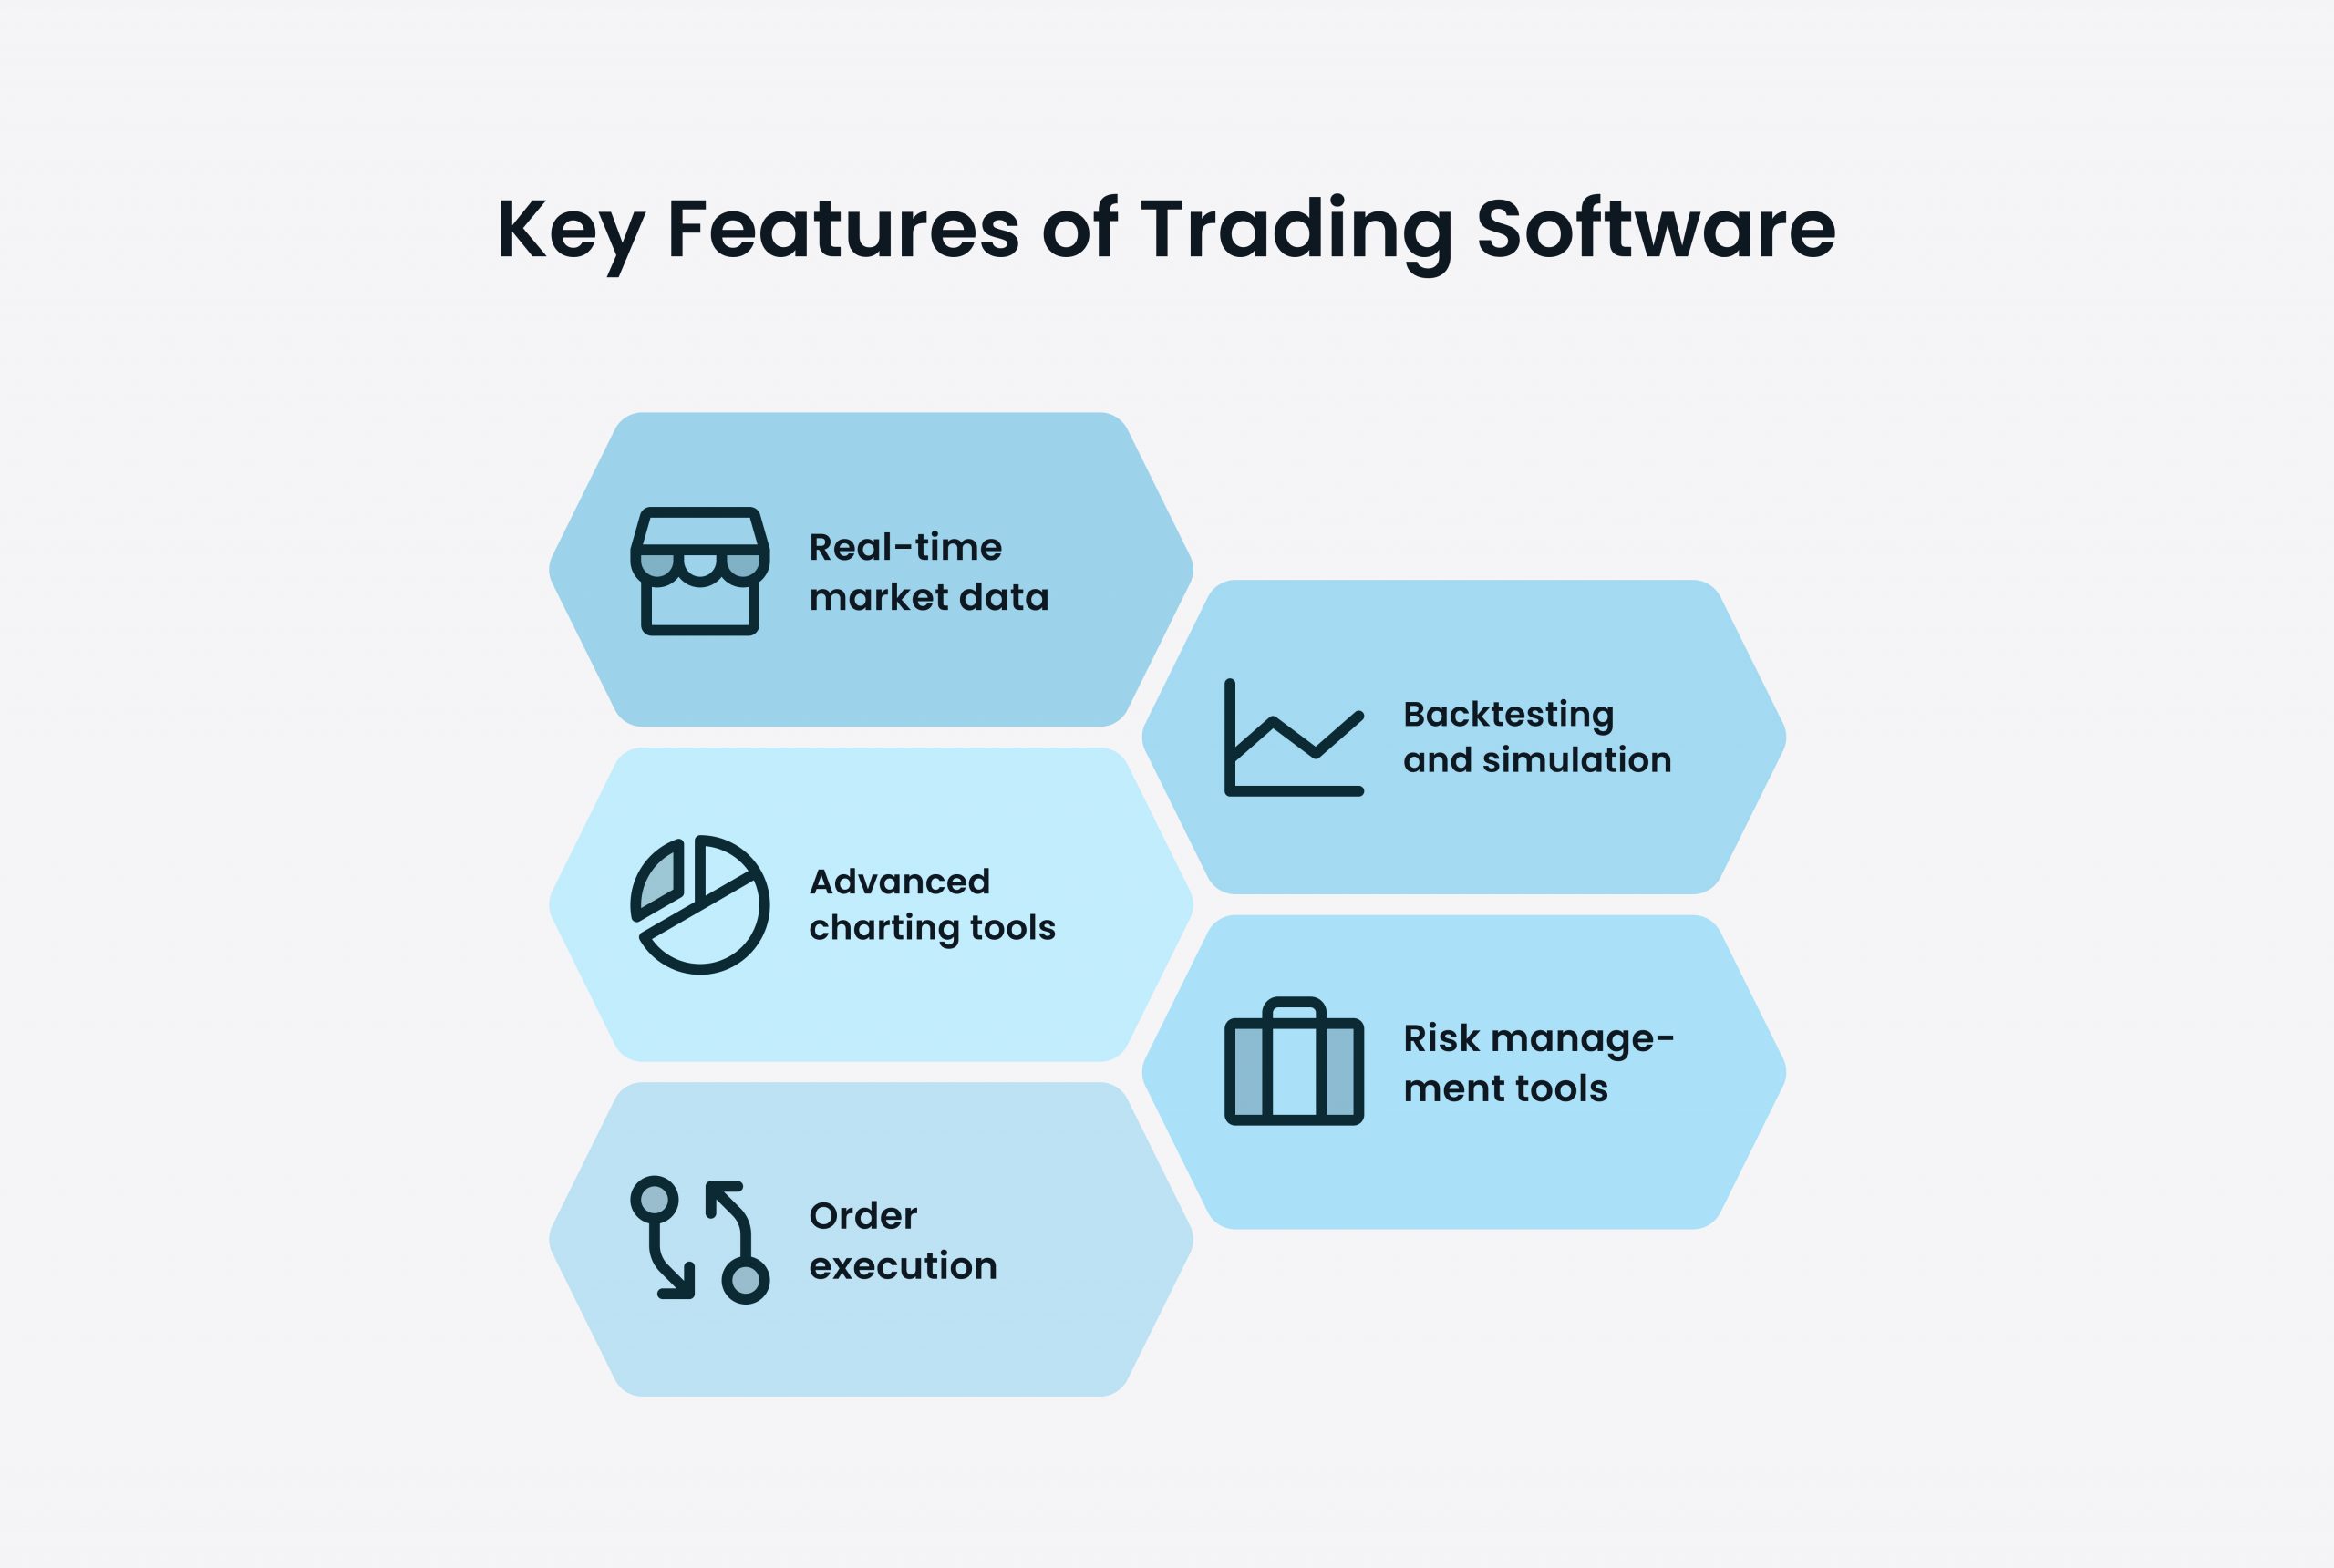 Key Features of Trading Software: Real-time market data, Advanced charting tools, Order execution, Backtesting and simulation, Risk management tools